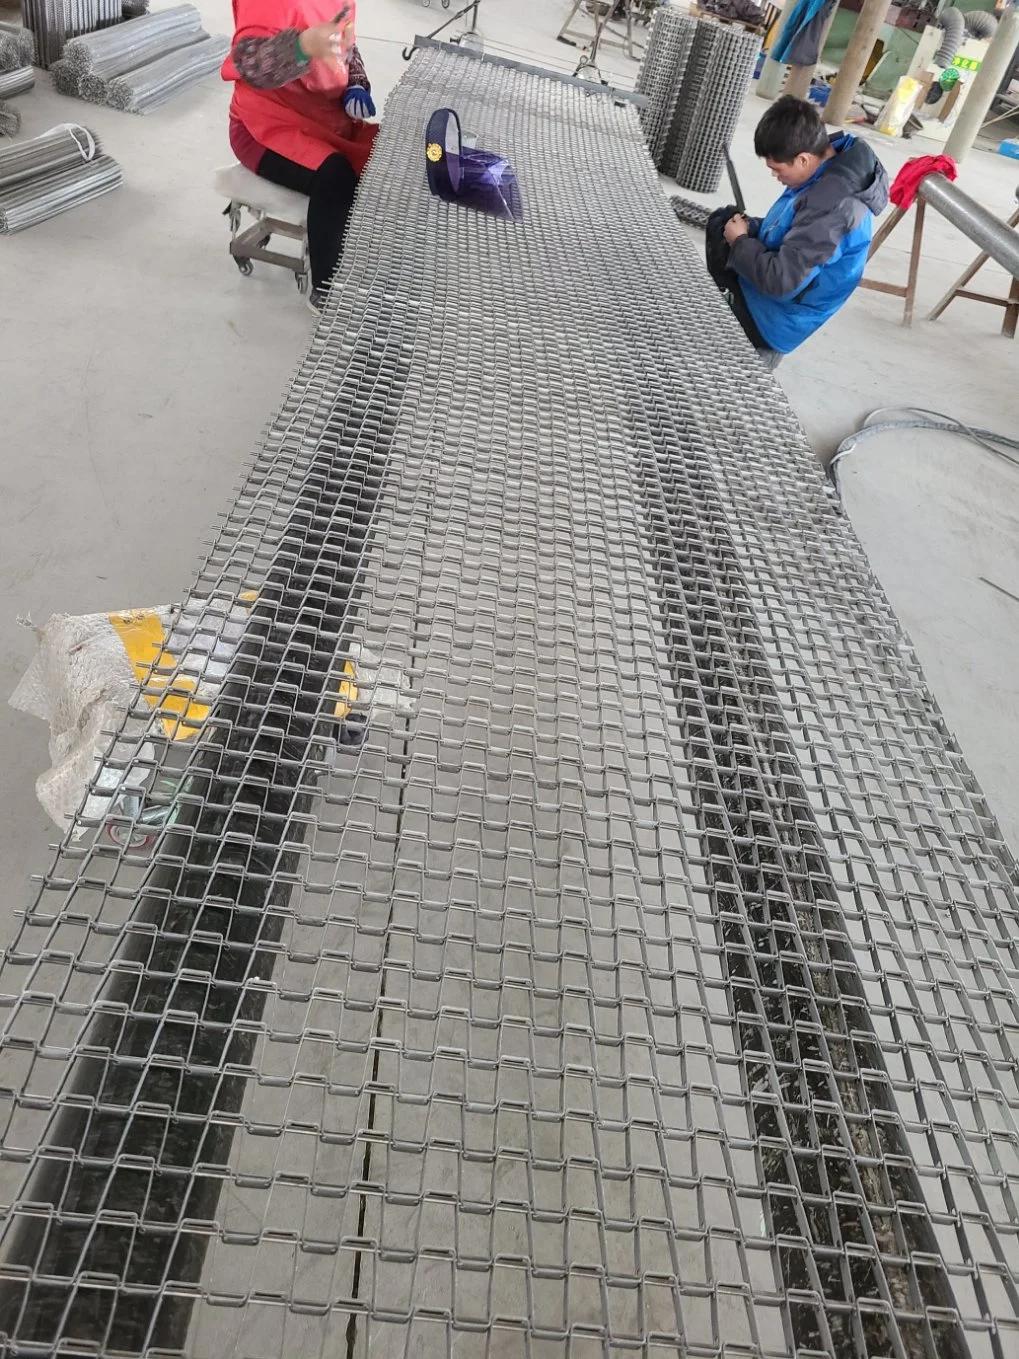 Stainless Steel Flat Wire Conveyor Belt Used in India